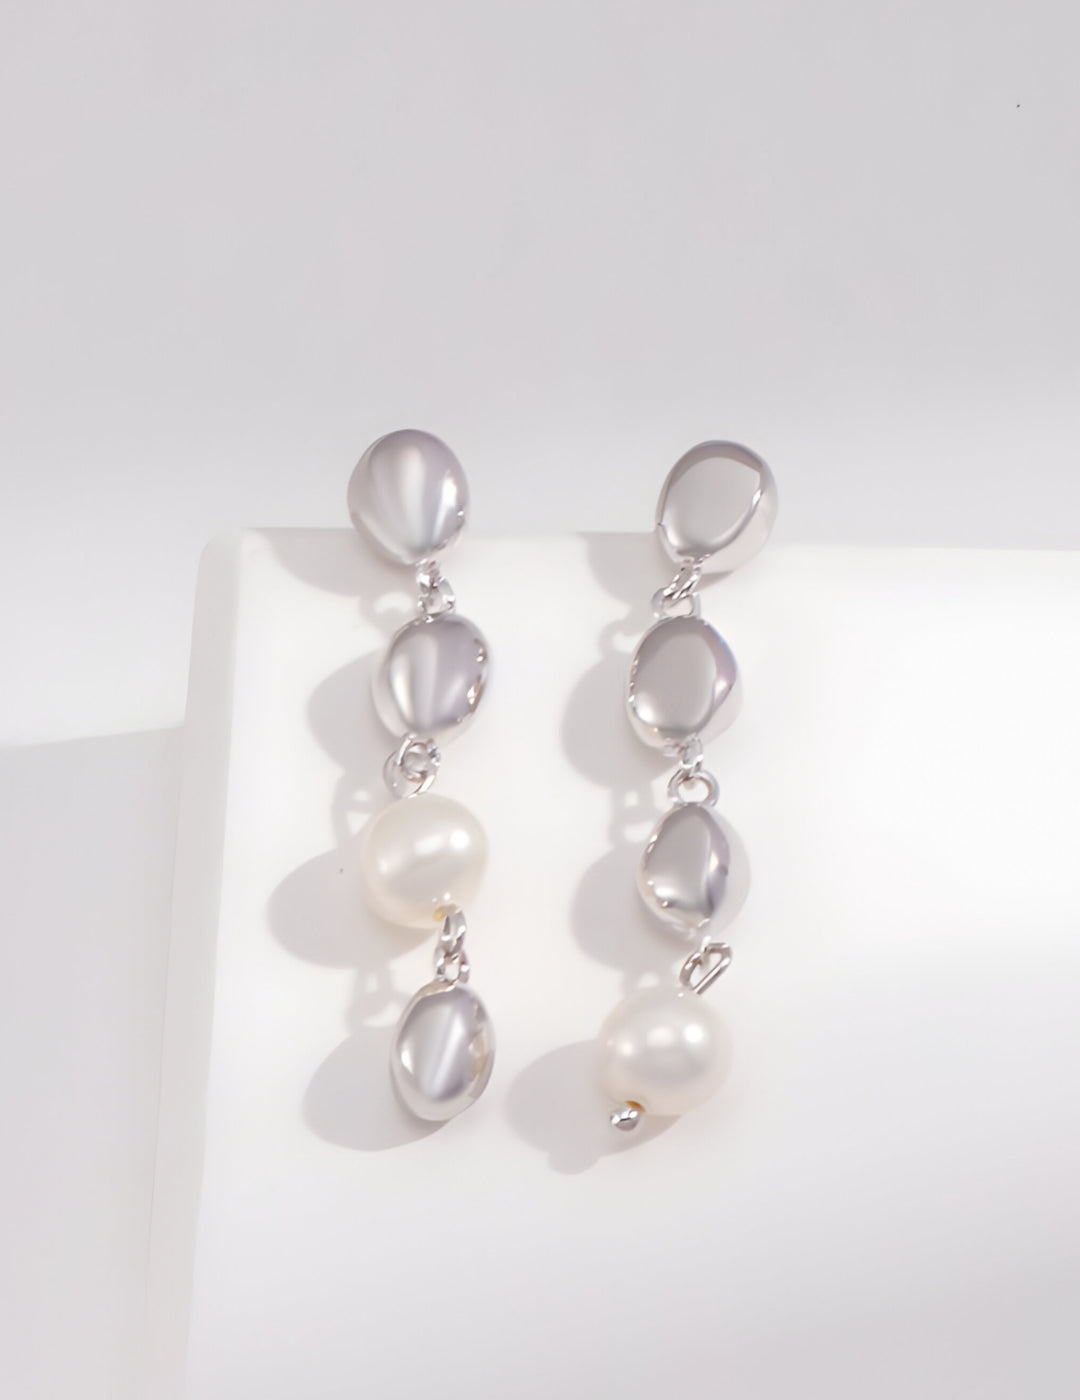 A symbol of interconnected beauty and harmonious rhythm elegance earrings - S925 Sterling Silver with 18K Gold Vermeil- Pearl Luminance -  timeless design and impeccable craftsmanship